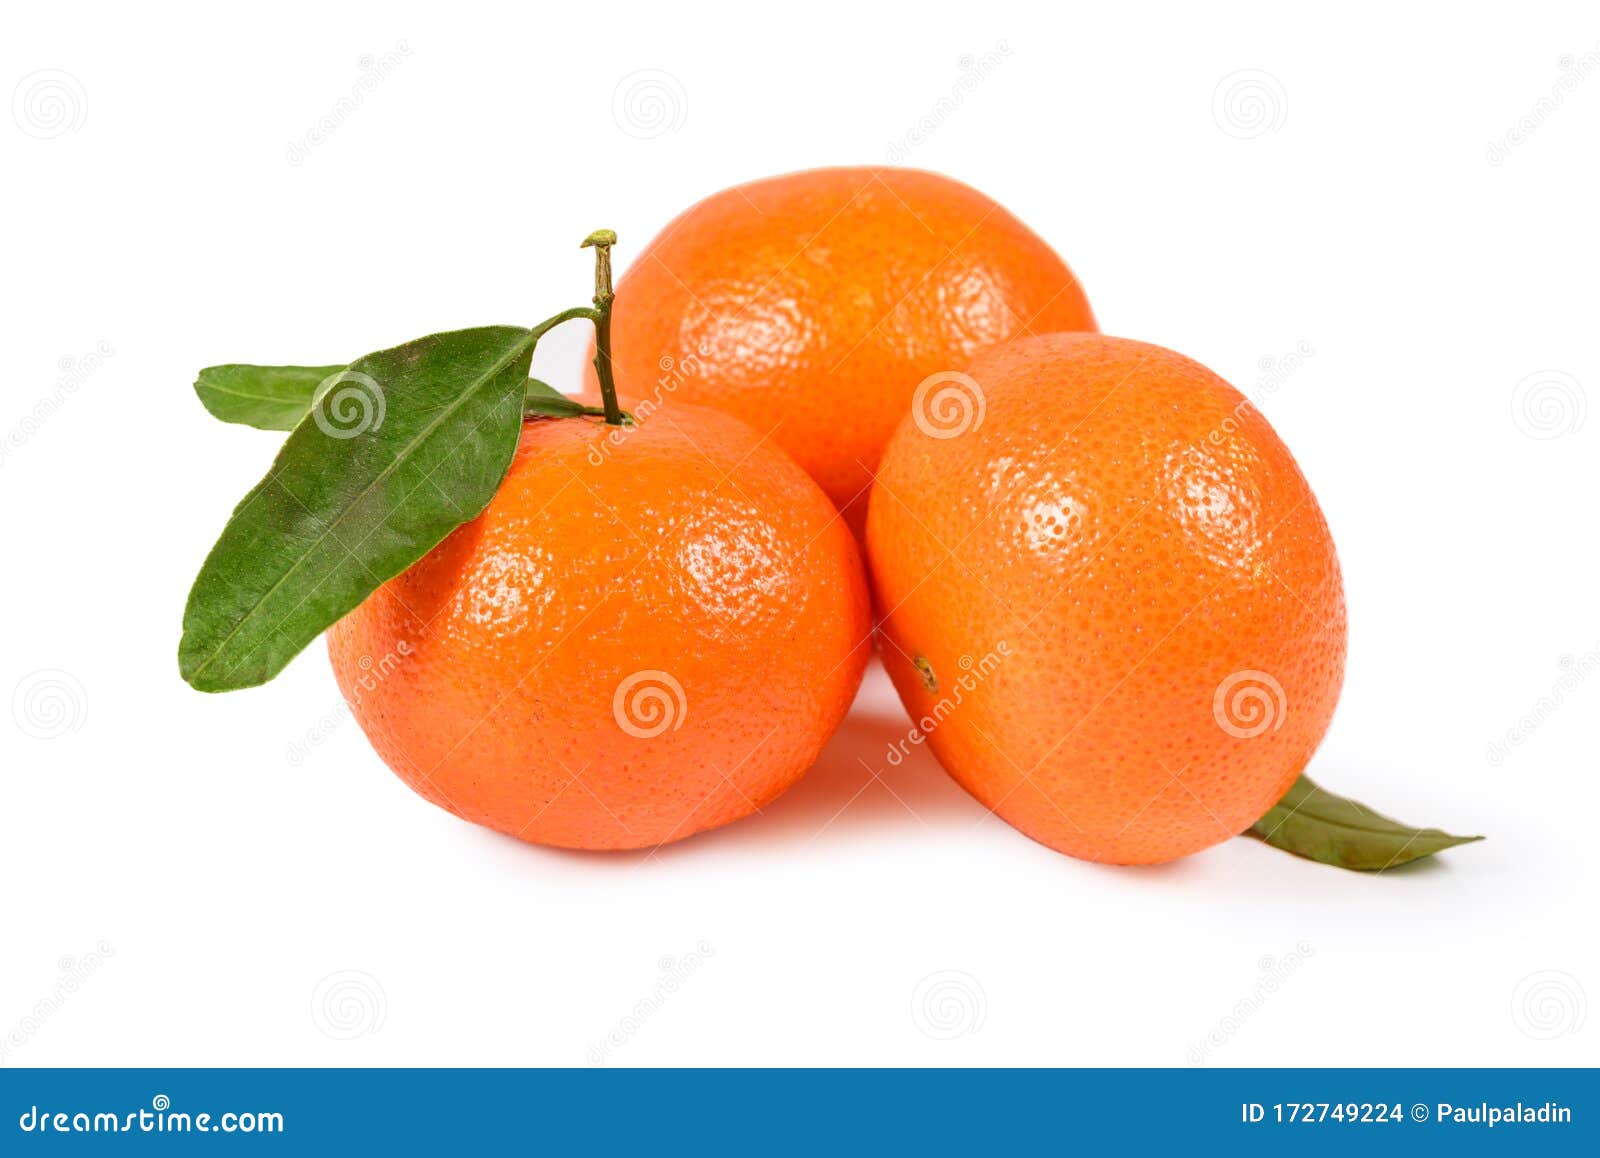 tangerine, clementine with green leaves  clipping path